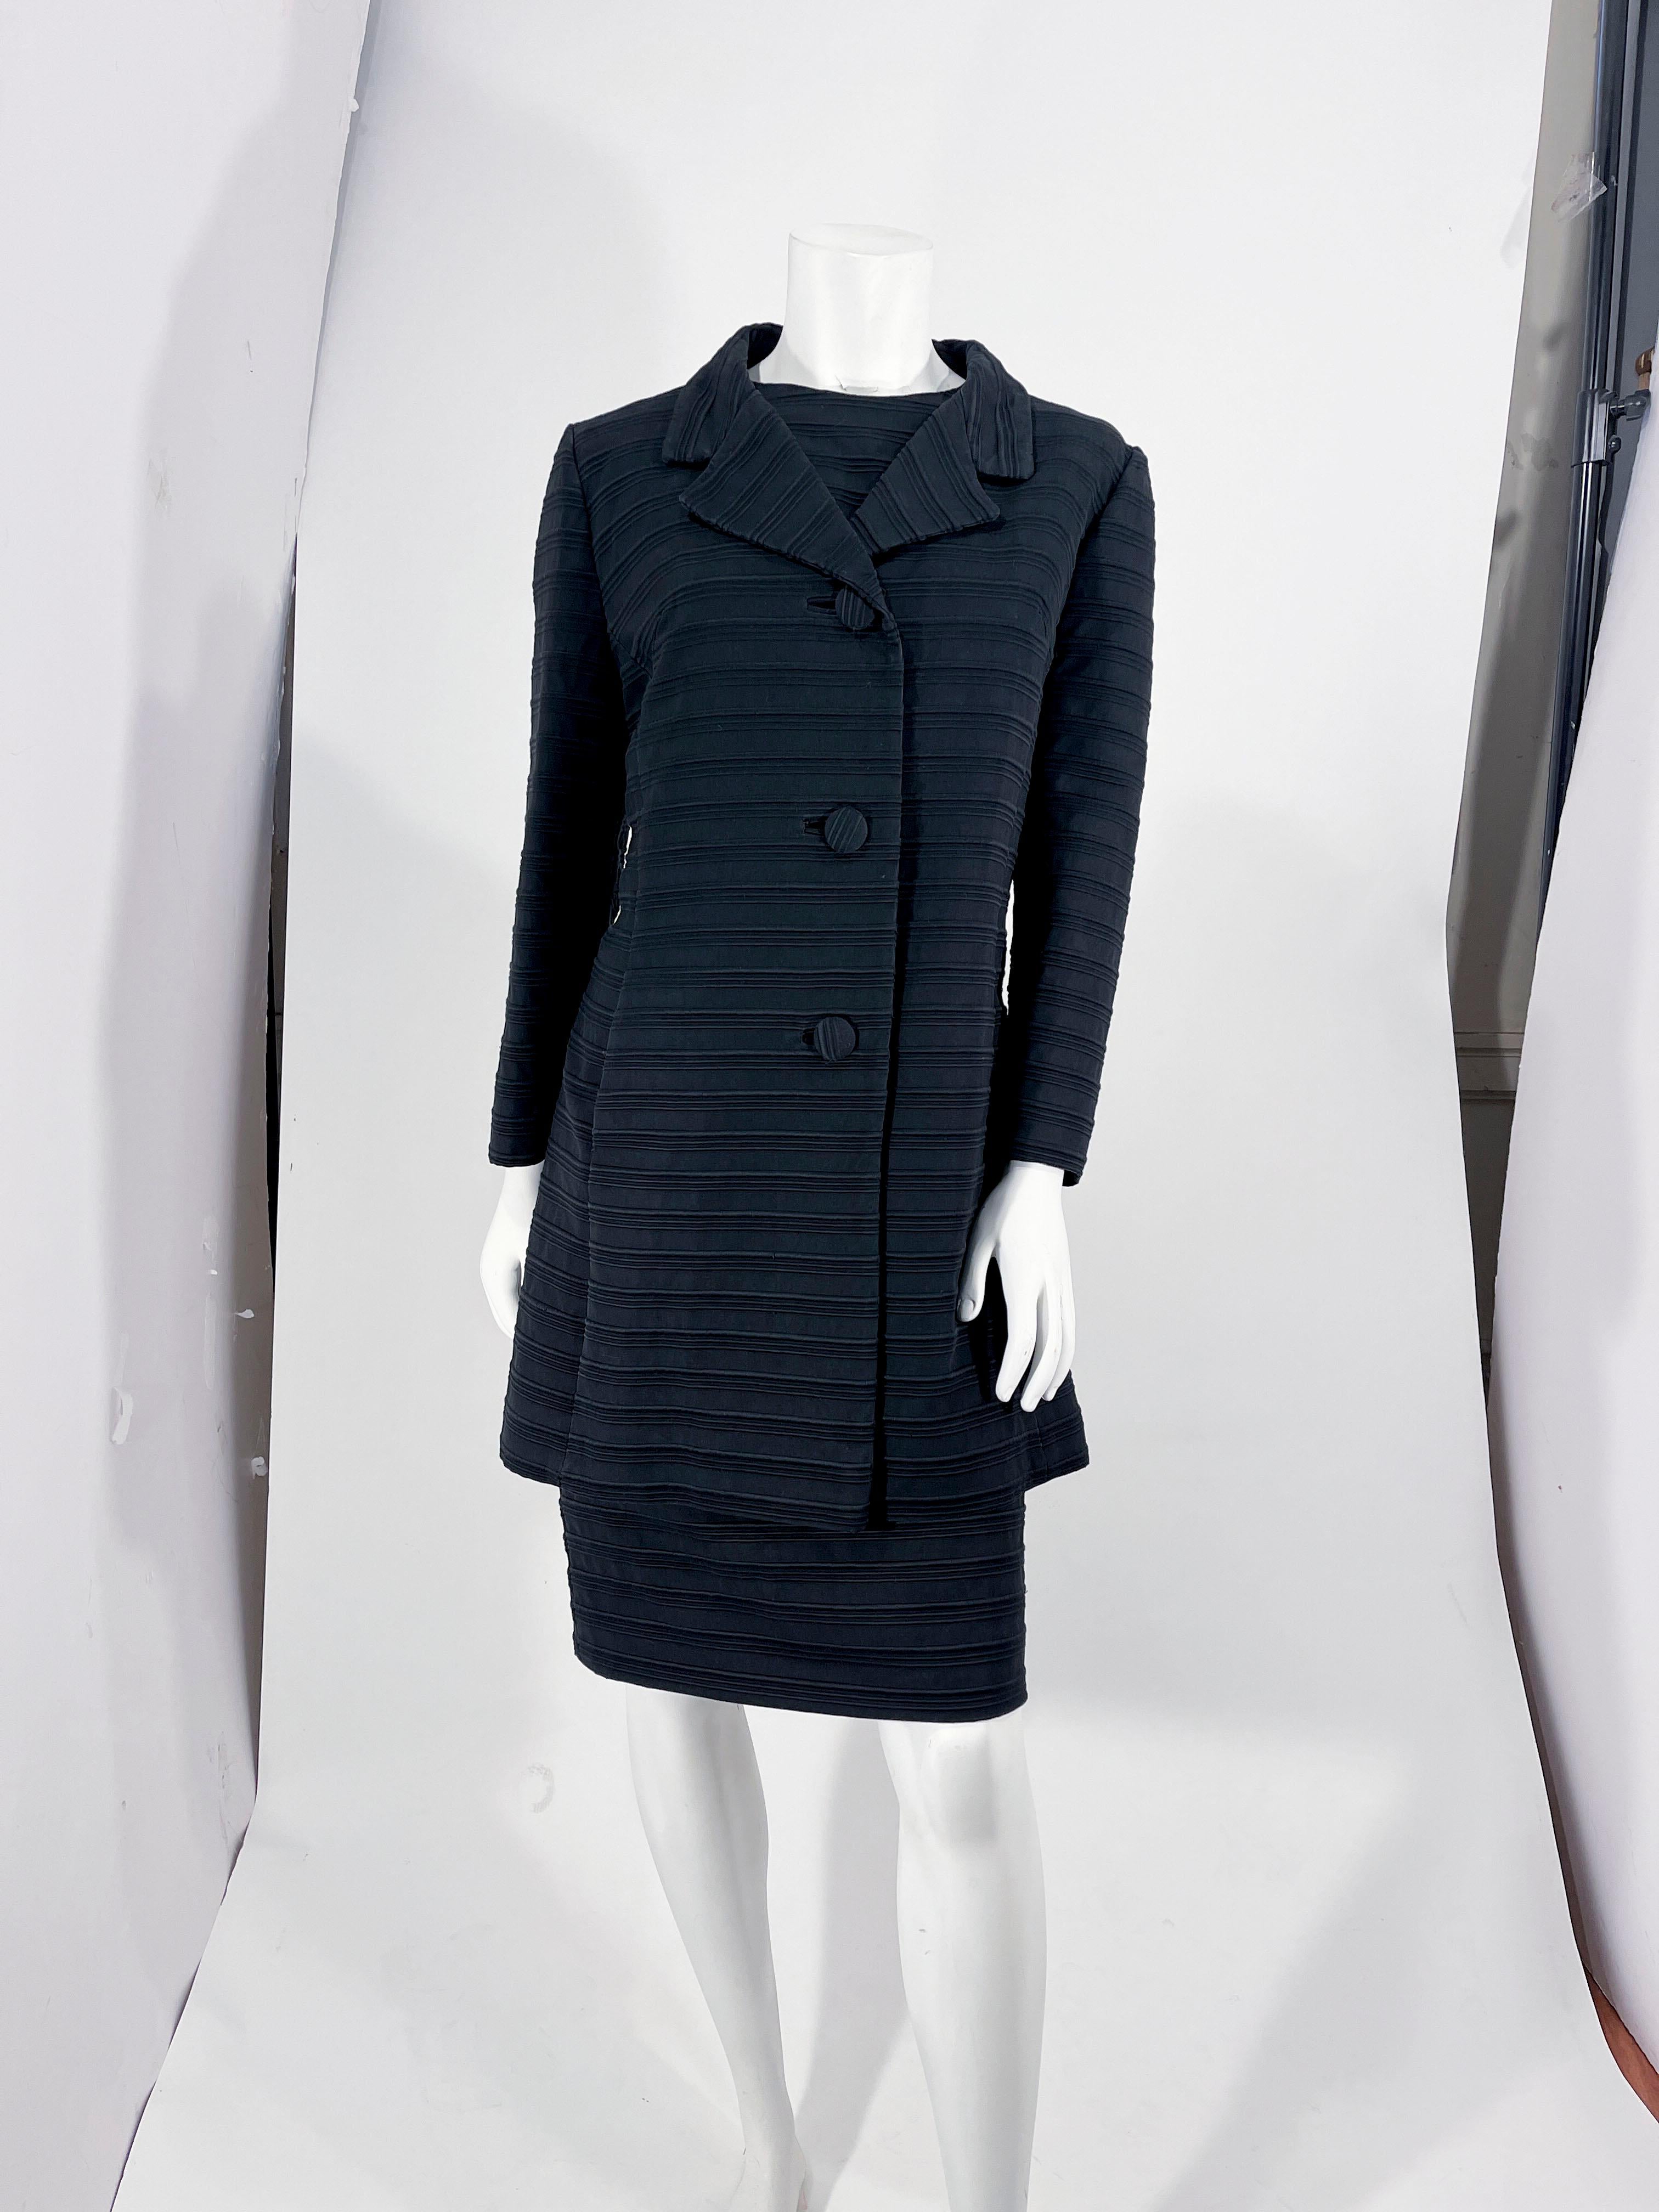 1960s Lilli Ann black textured matching dress and coat ensemble. The sleeveless shift dress features a high scoop neckline, and a full black lining. The back of the dress has a metal zippered closure. 

The matching coat has three-quarter length